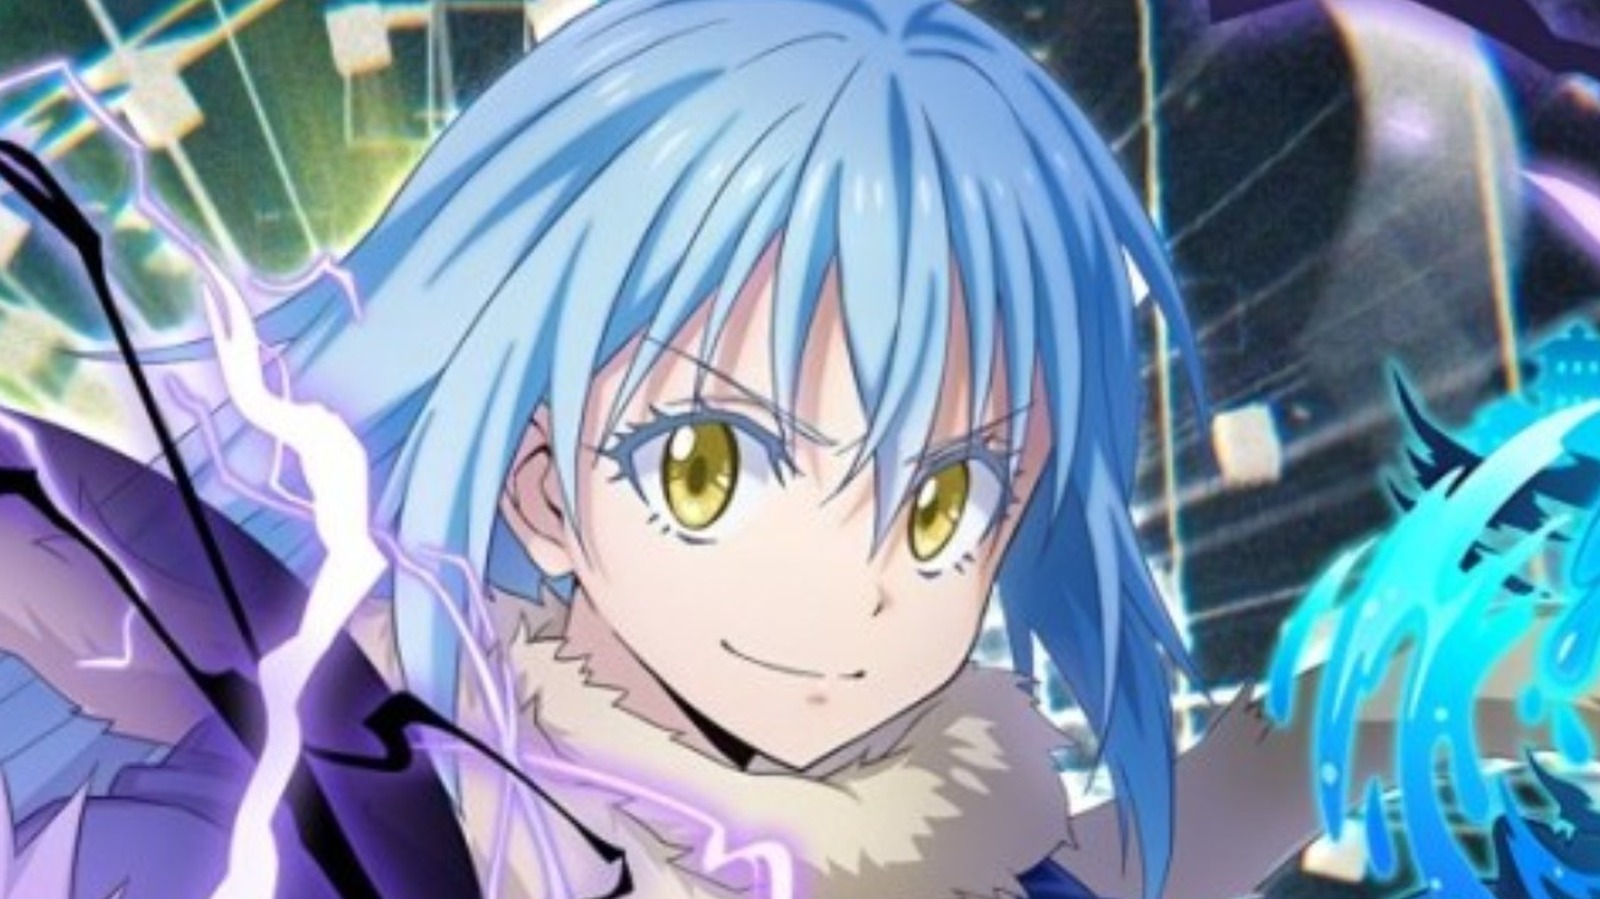 That Time I Got Reincarnated As A Slime: Isekai Memories - What We Know So  Far